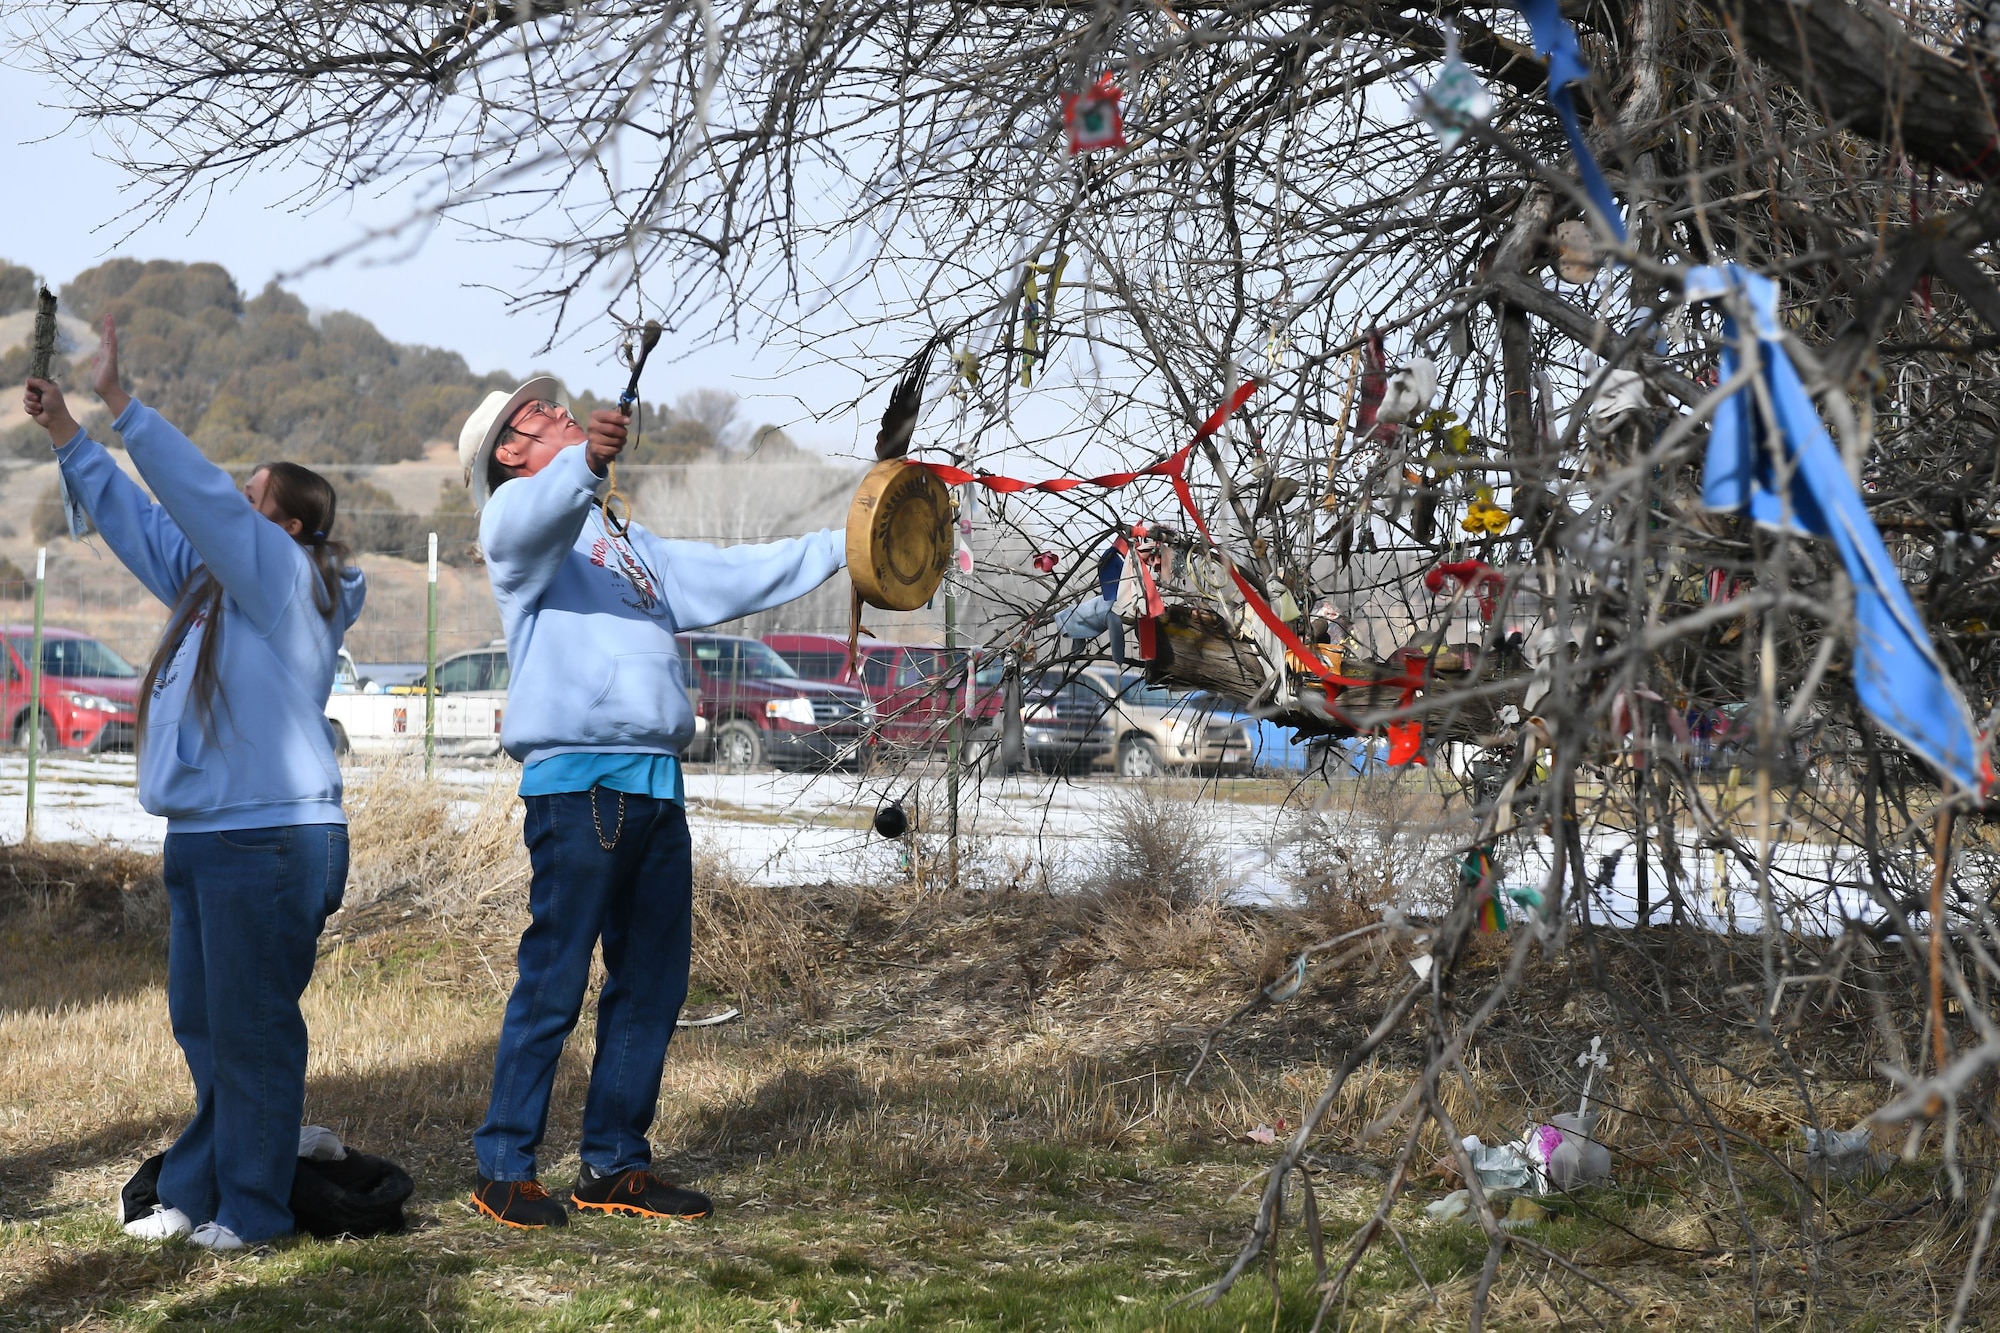 Spiritual leaders from the Northwestern Band of the Shoshone Nation offer a blessing on the site of the Bear River Massacre near Preston, Idaho. (U.S. Air Force photo by Cynthia Griggs)